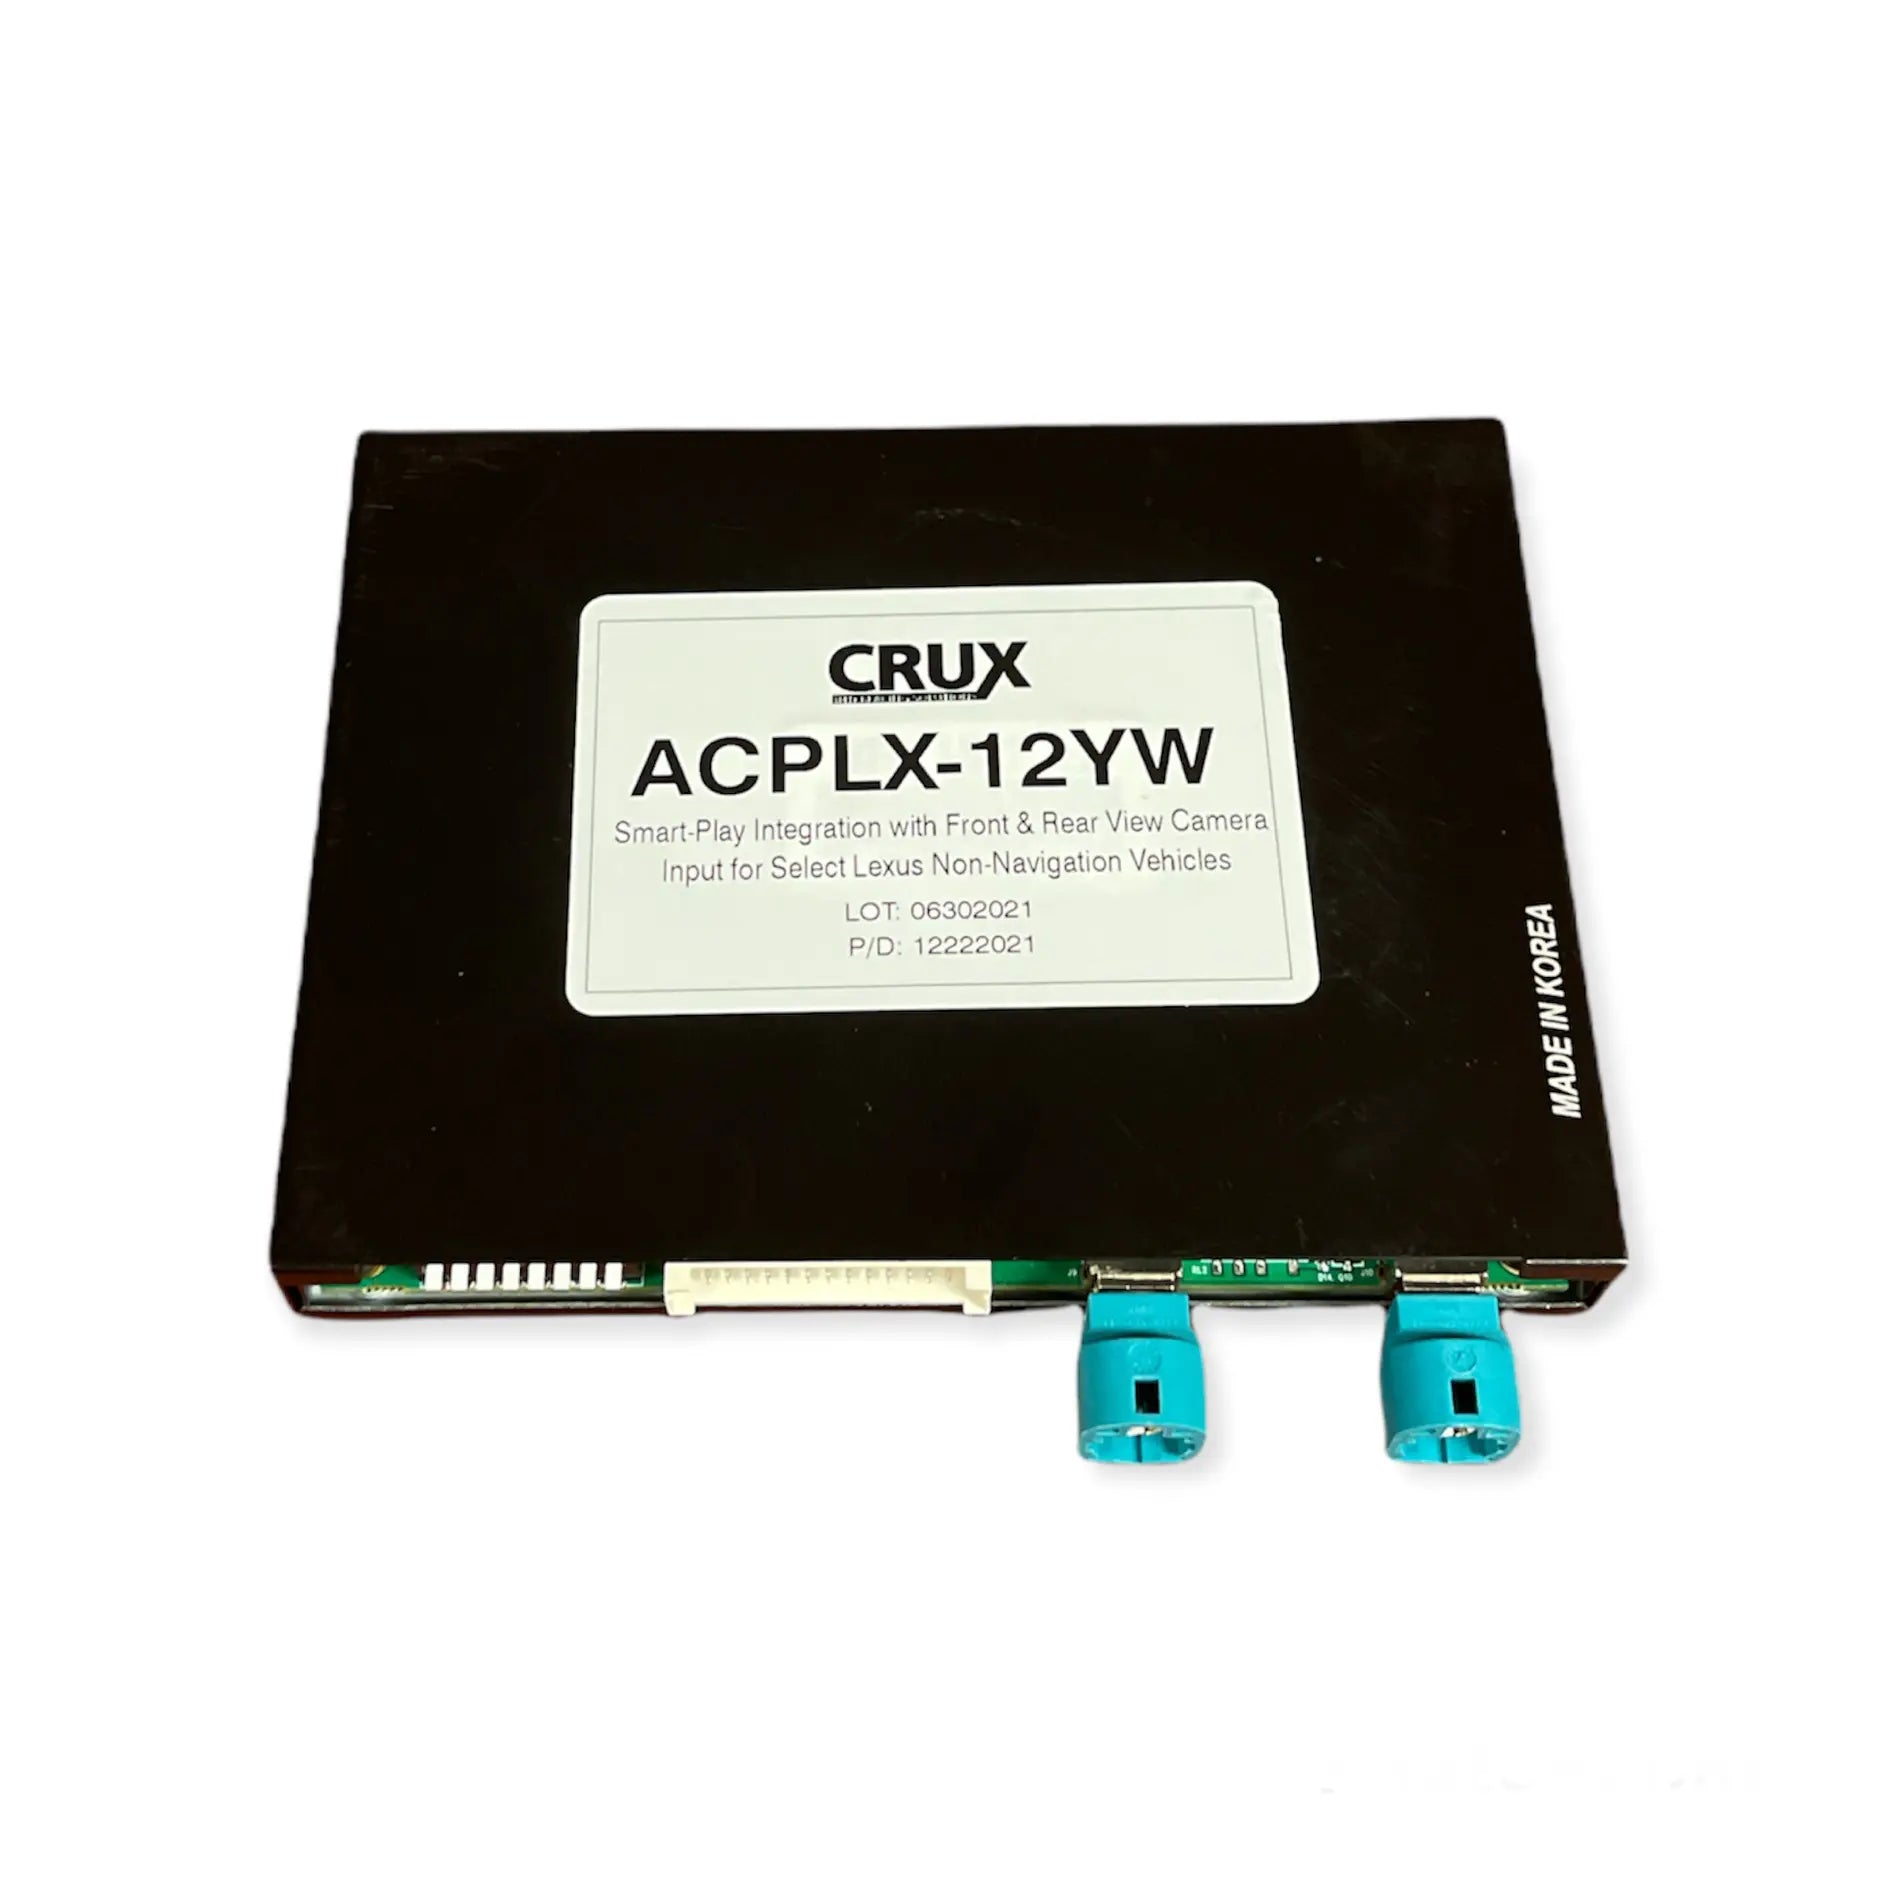 Crux ACPLX-12YW Wireless Smart-Play Integration with Multi Camera Inputs for Select 2013-2020 Lexus Vehicles without OEM Navigation